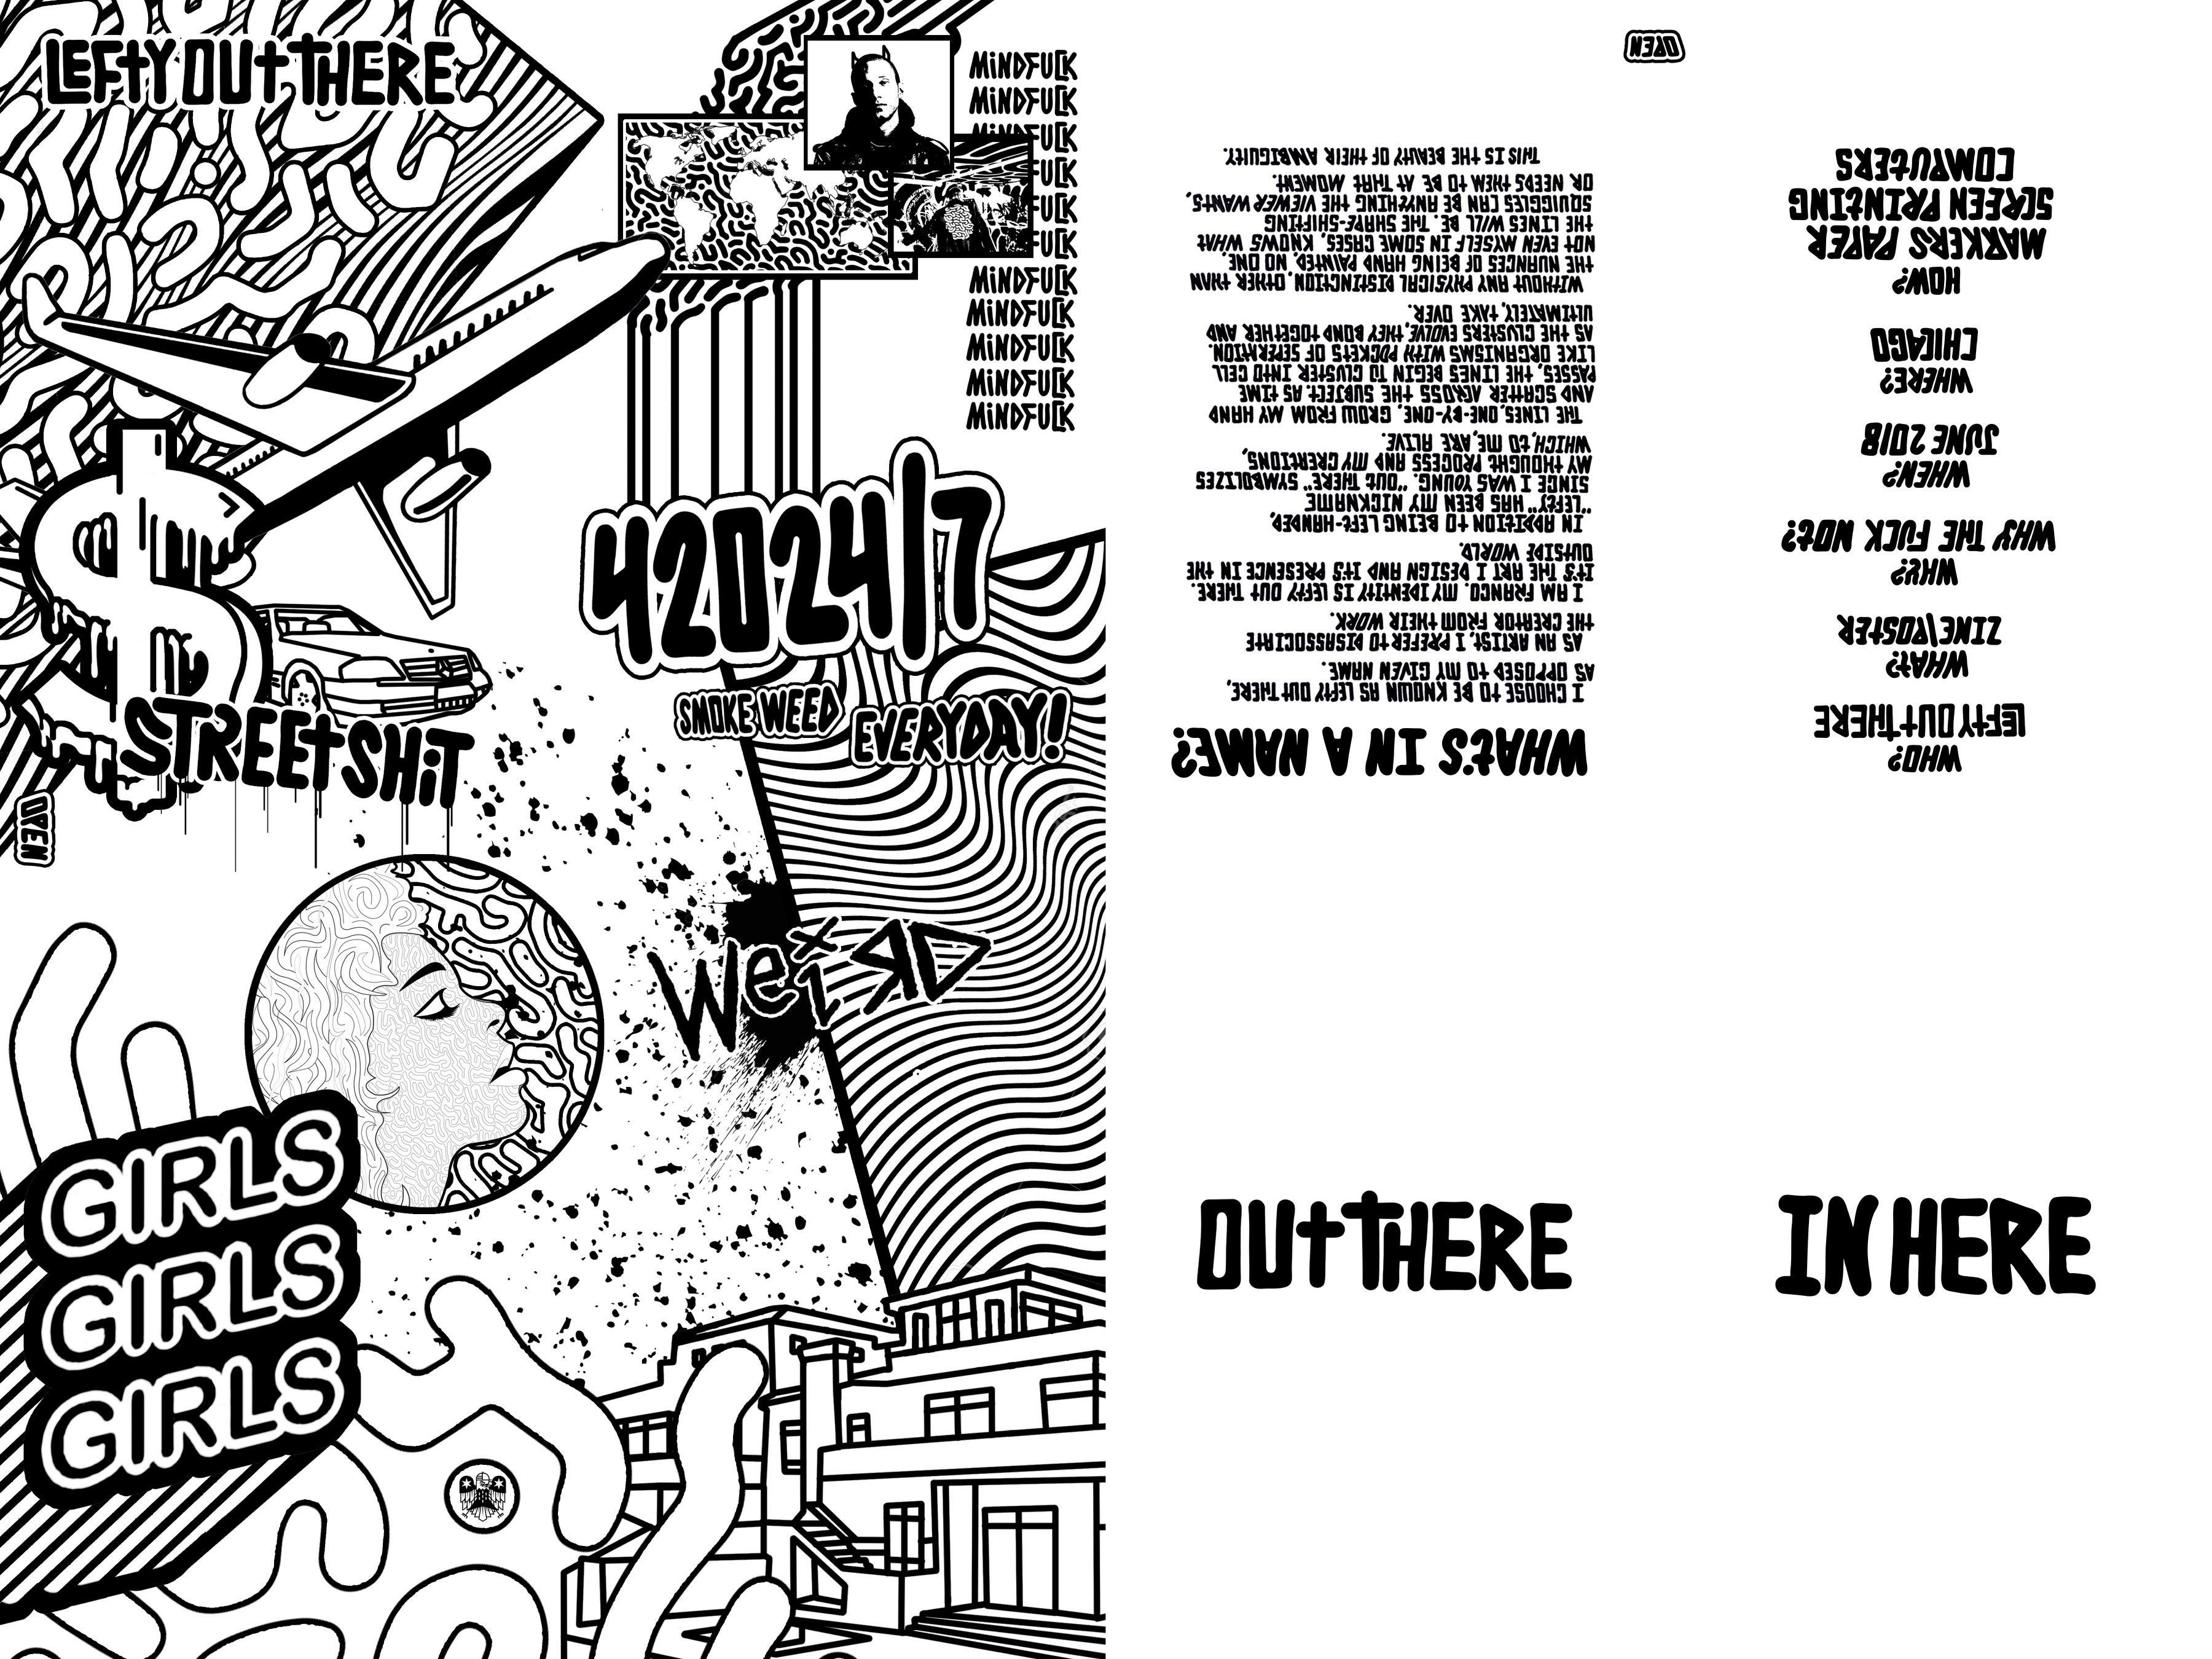 "In Here (Zine)" by Lefty Out There